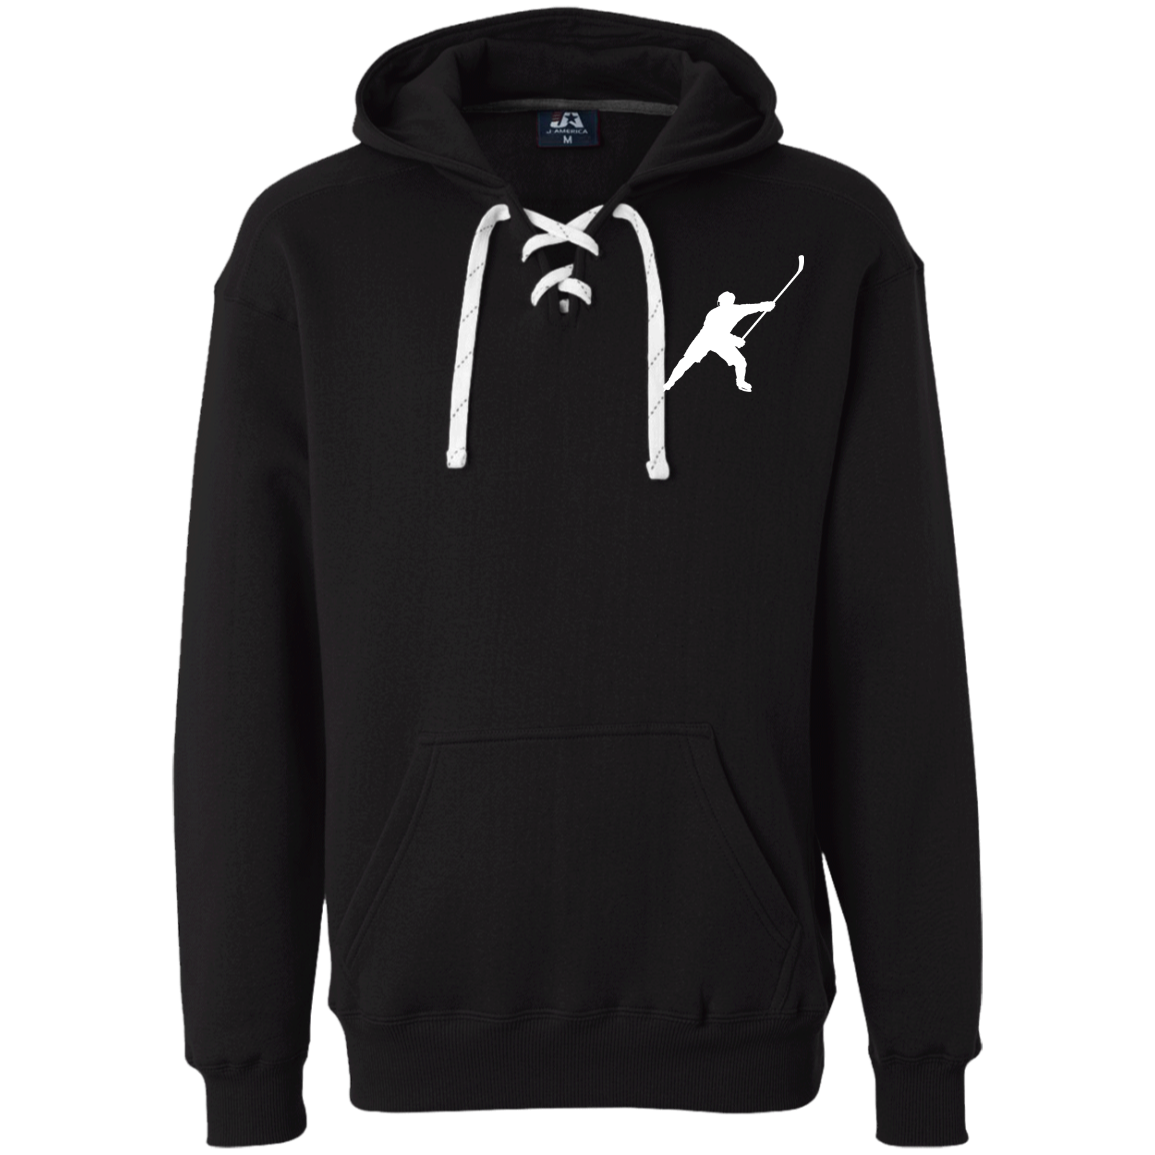 MY SPORT HOCKEY™ EMBROIDERED HEAVYWEIGHT SPORT LACE HOODIE